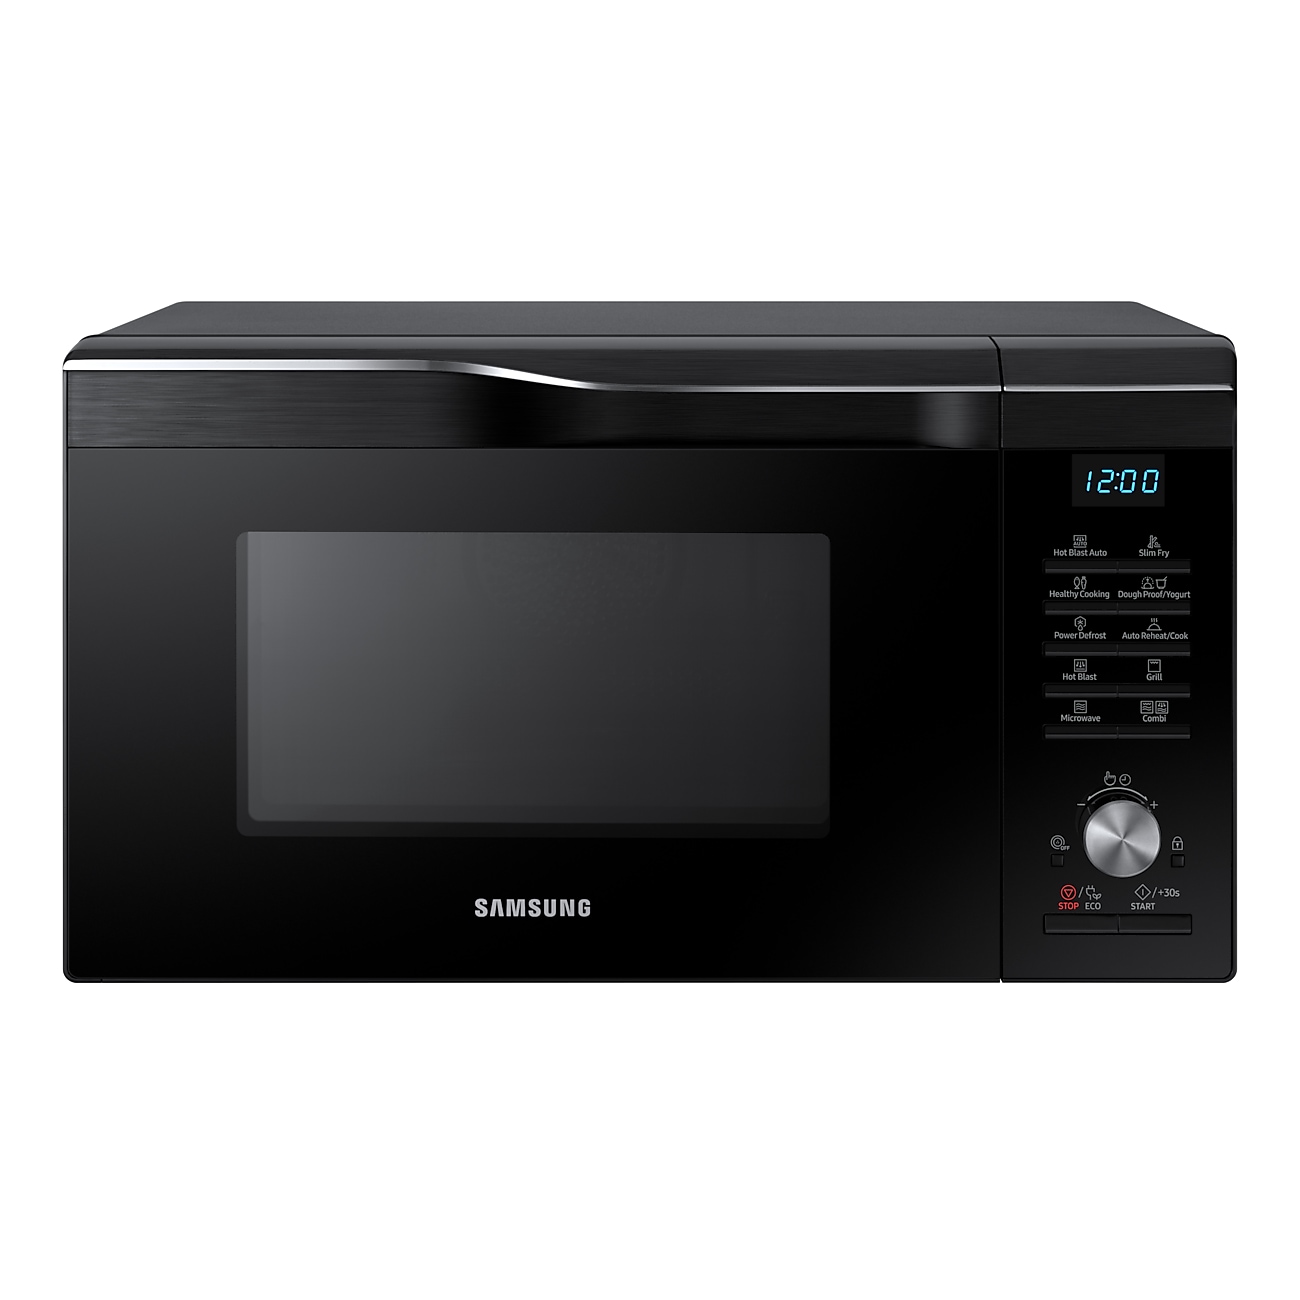 Samsung Easy View™ MC28M6055CK 28 Litre Combination Microwave Oven - Black